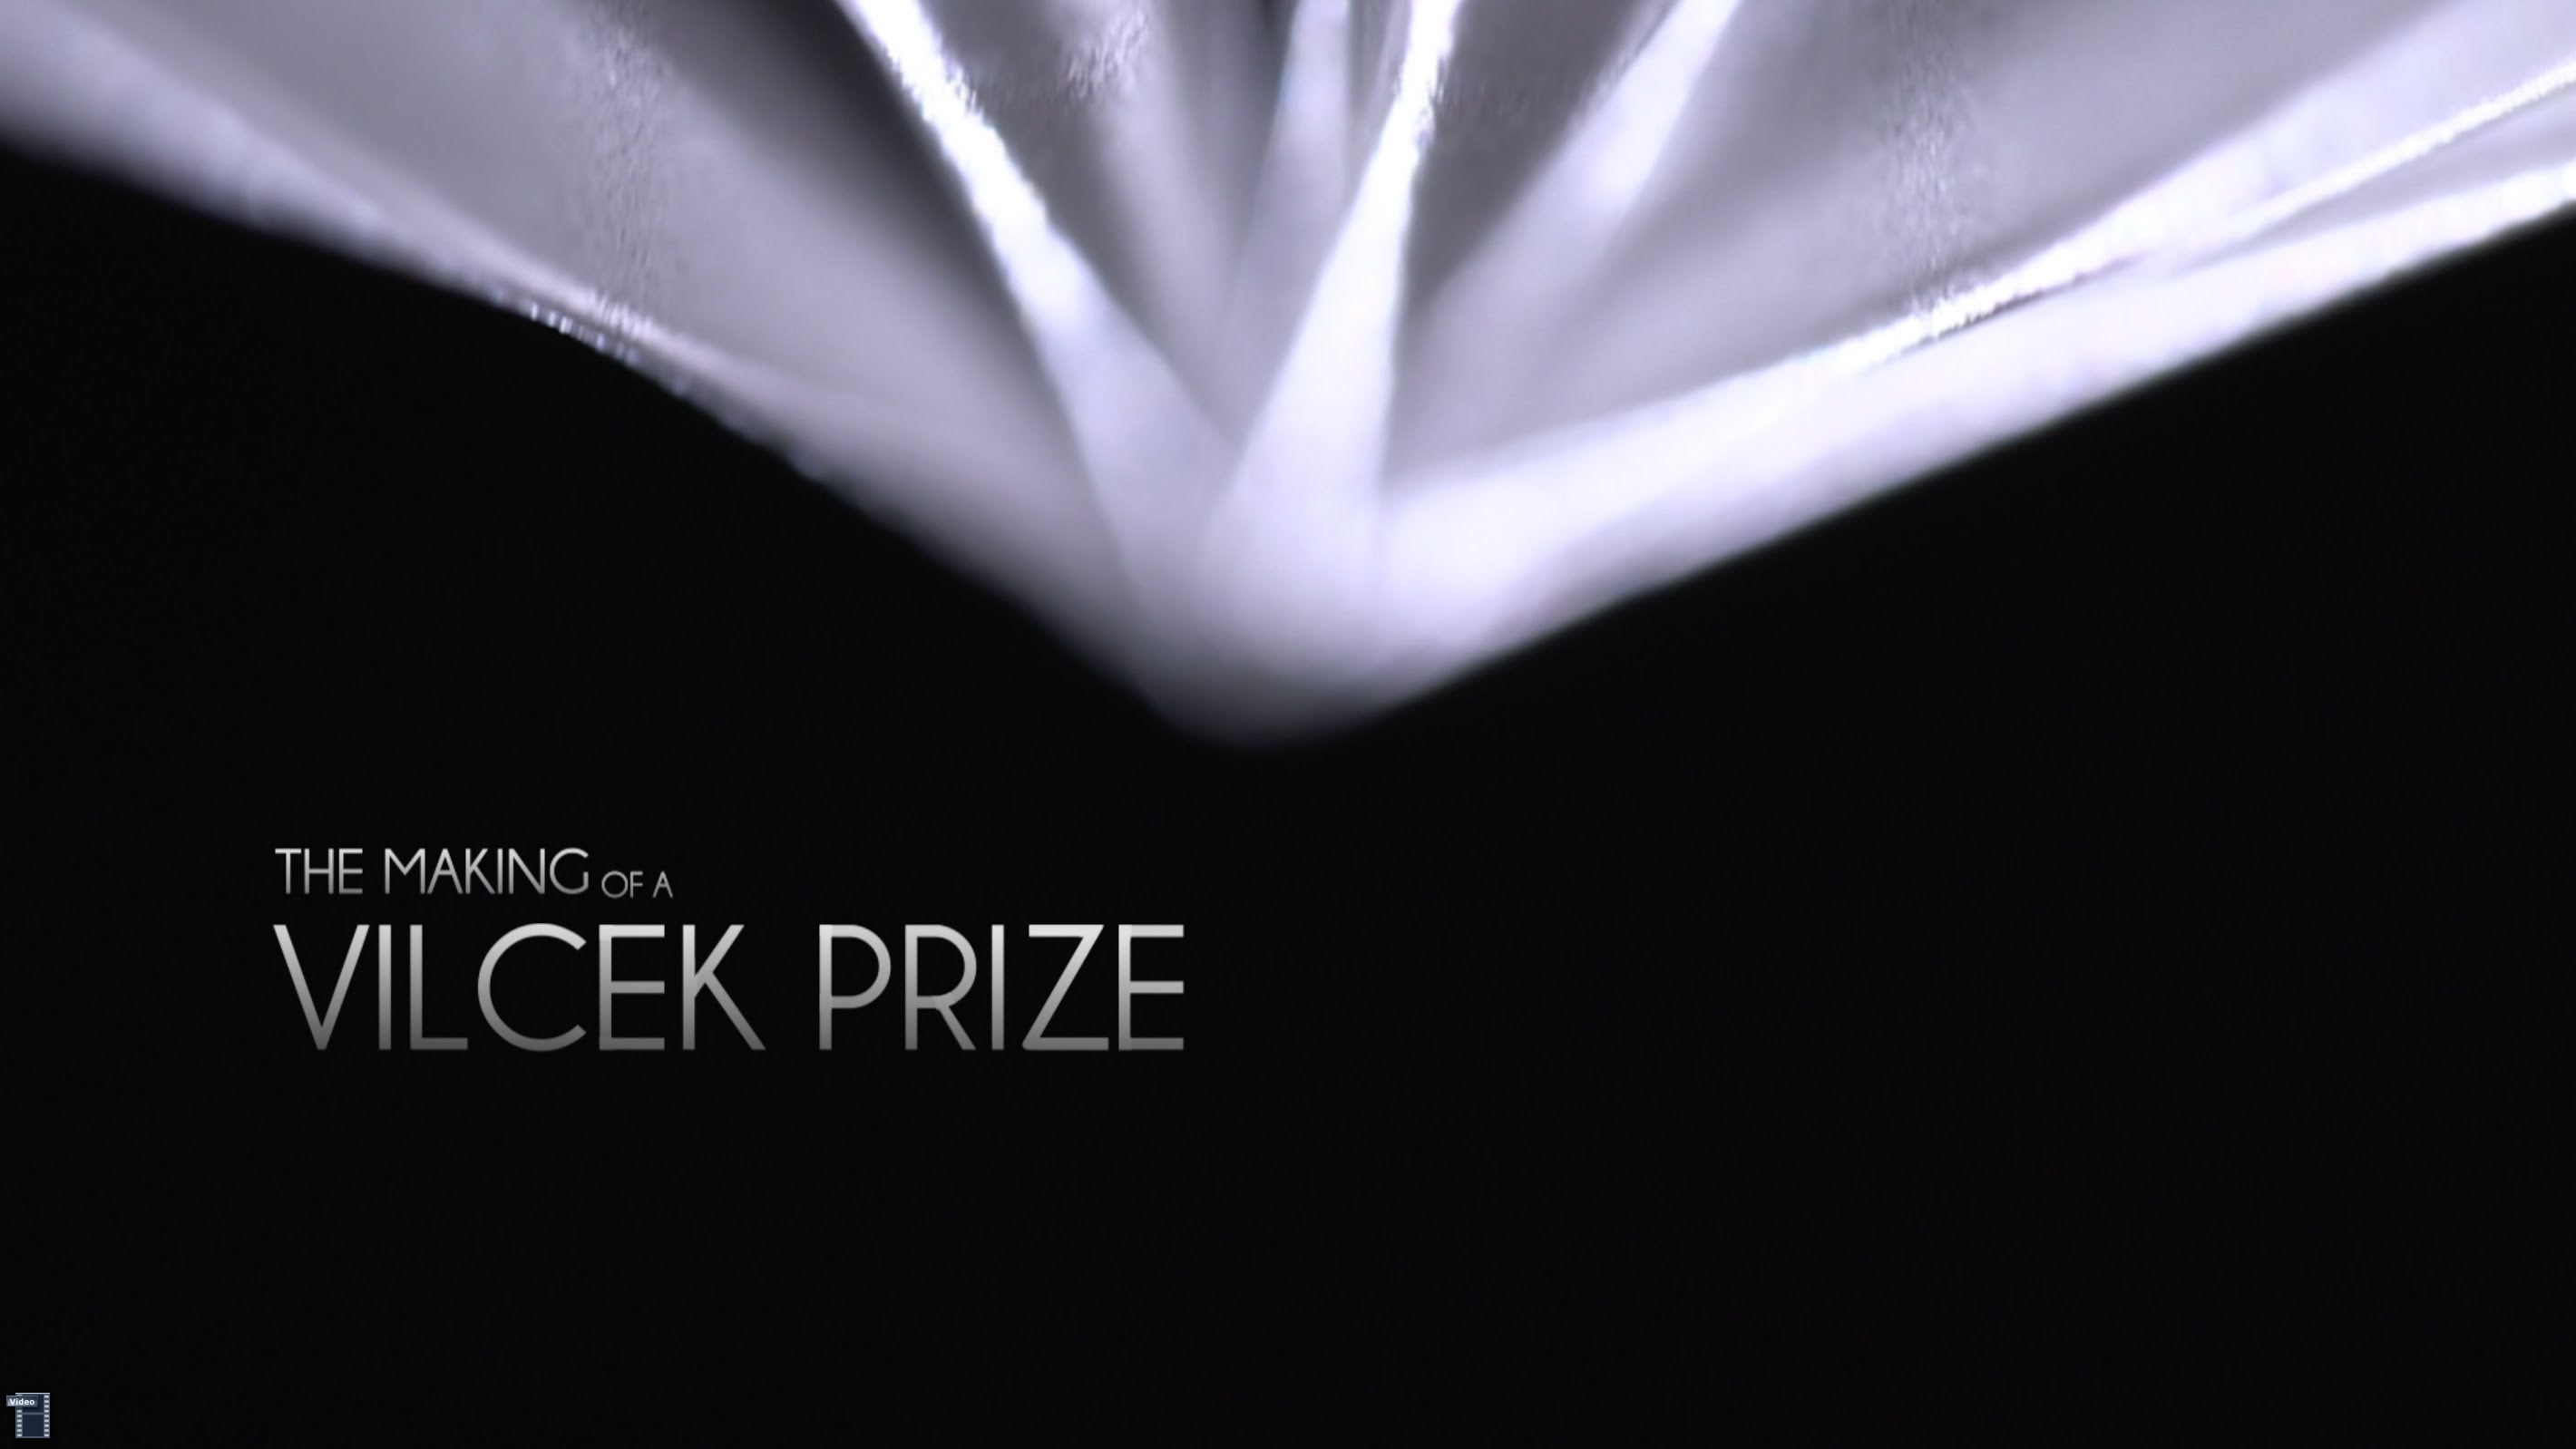 The Making of a Vilcek Prize